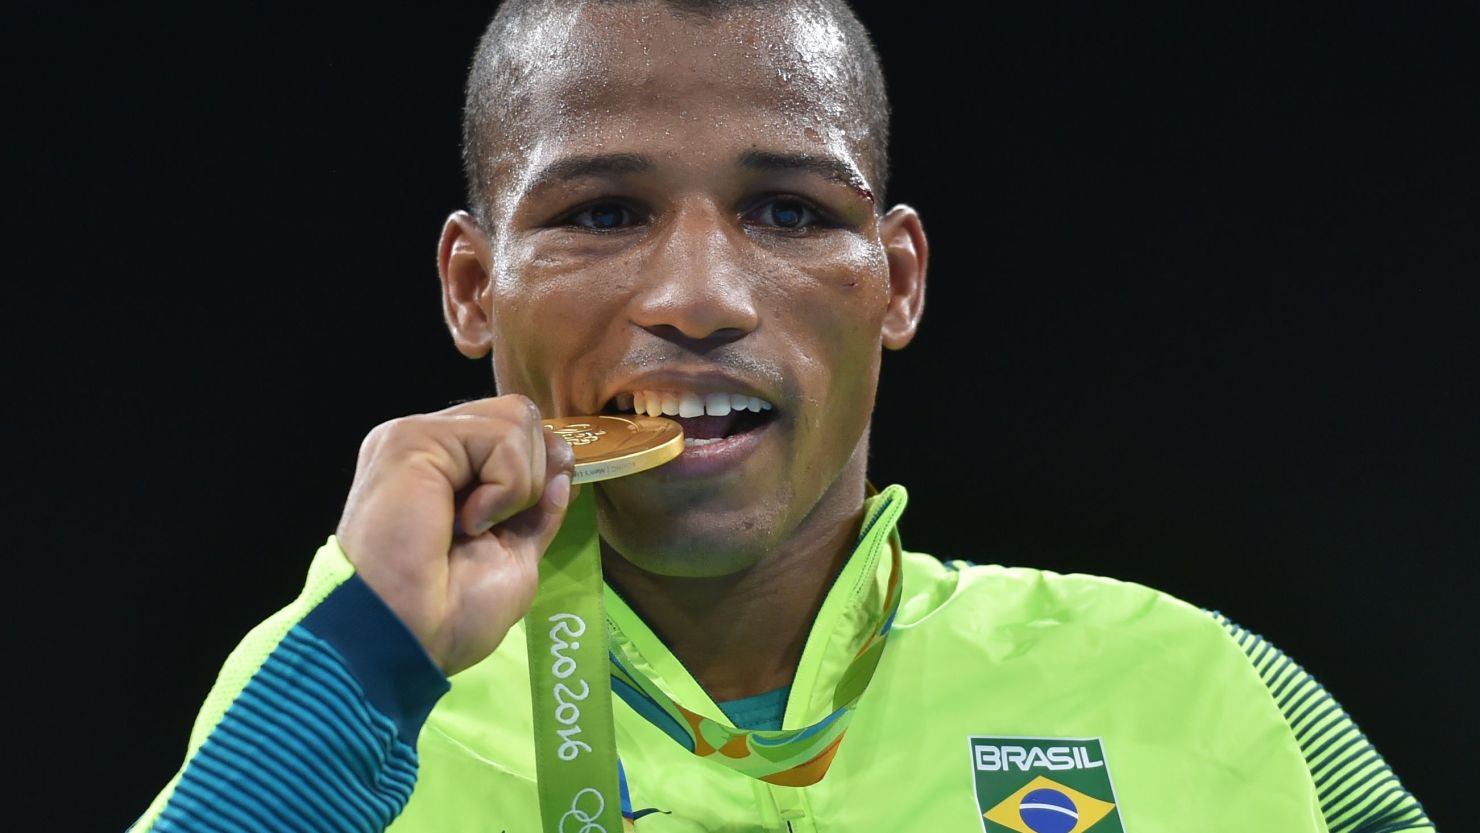 Brazil's Robson Conceicao poses with a gold medal at the Rio 2016 Olympic Games in Rio de Janeiro on August 16, 2016.  